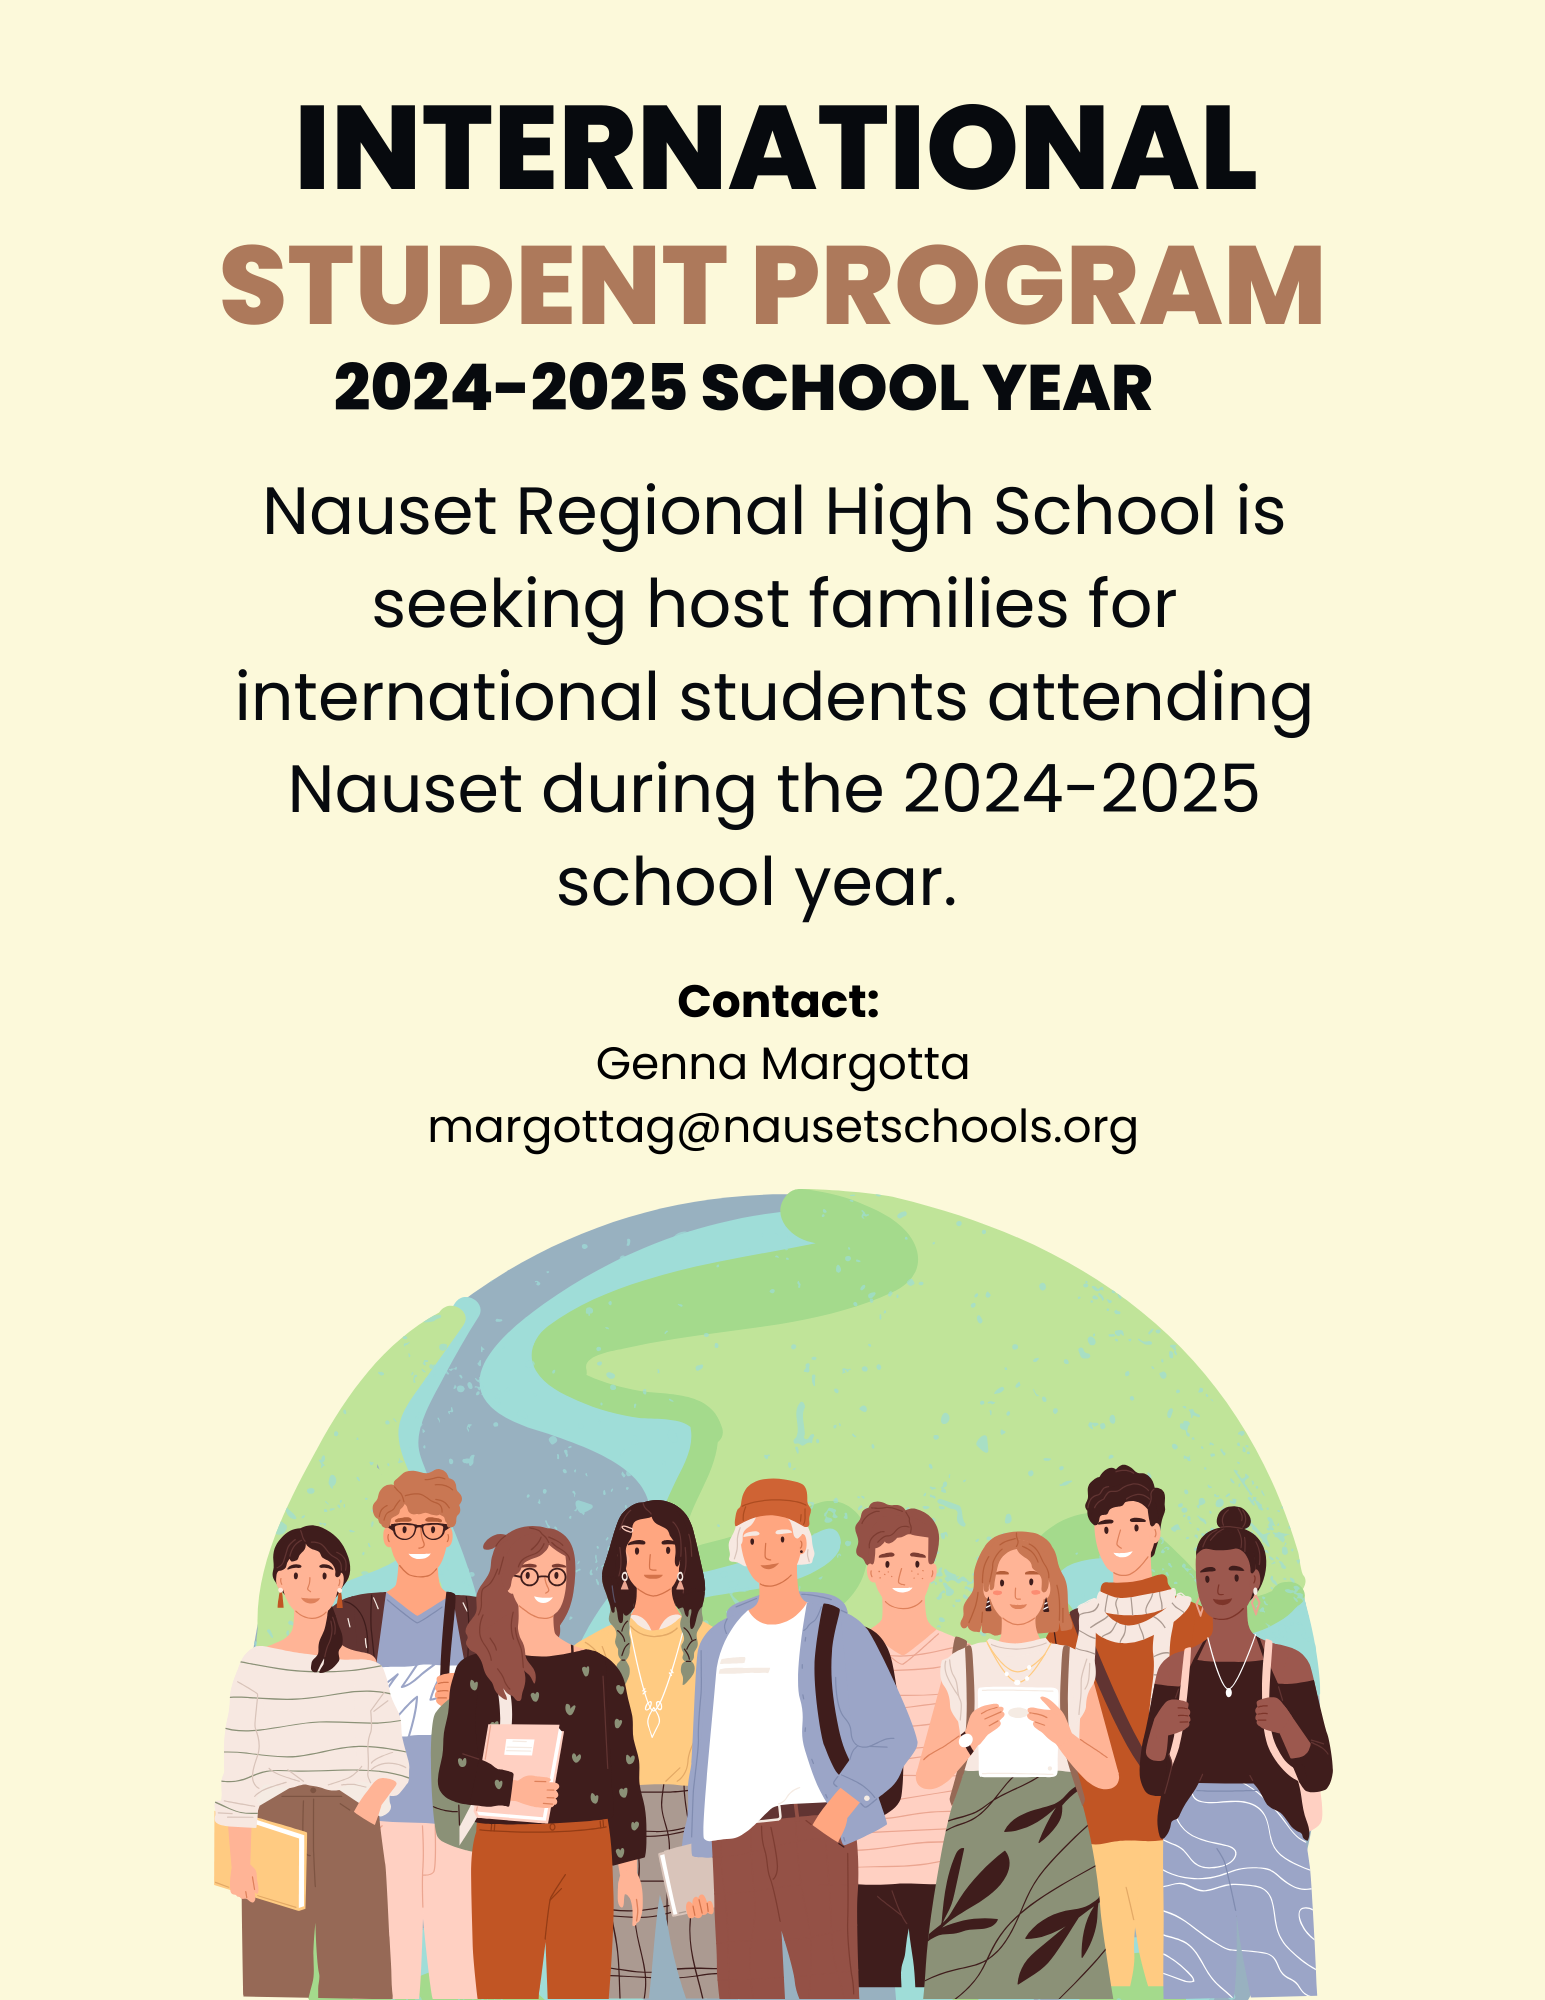 Flier for NRHS International Student Program - picture of the world and students